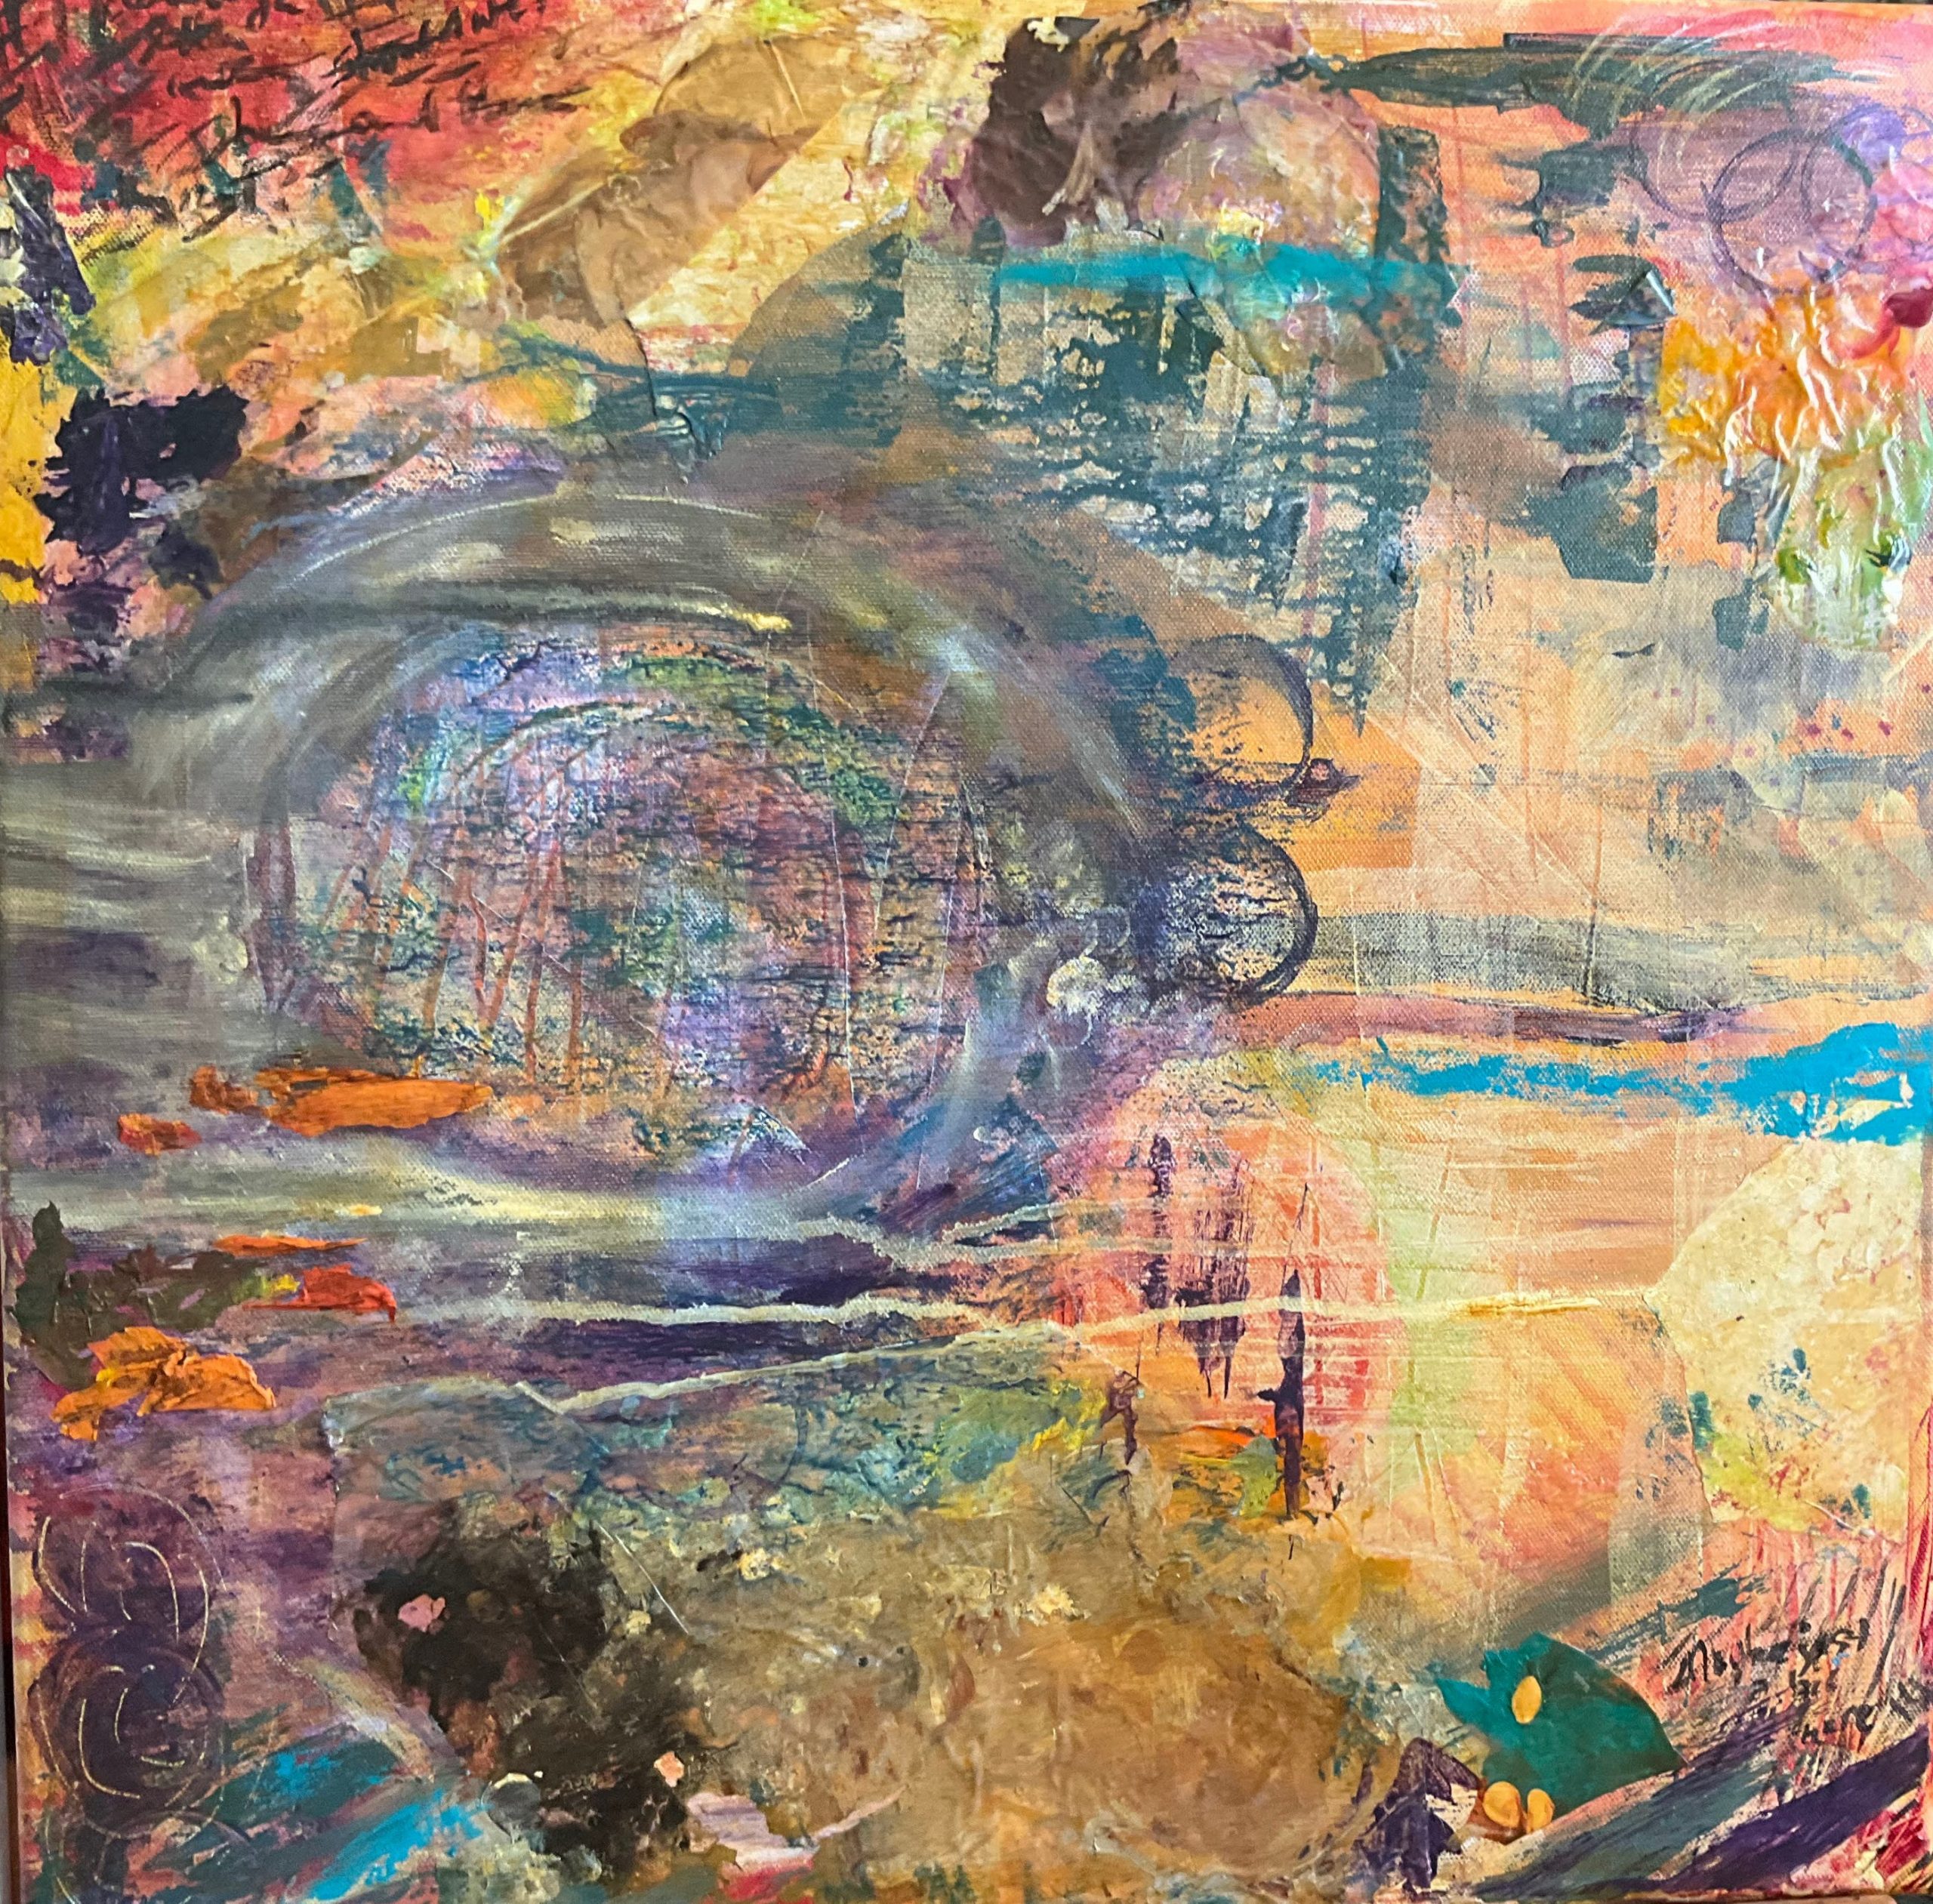 Abstract painting using acrylic paint and inks